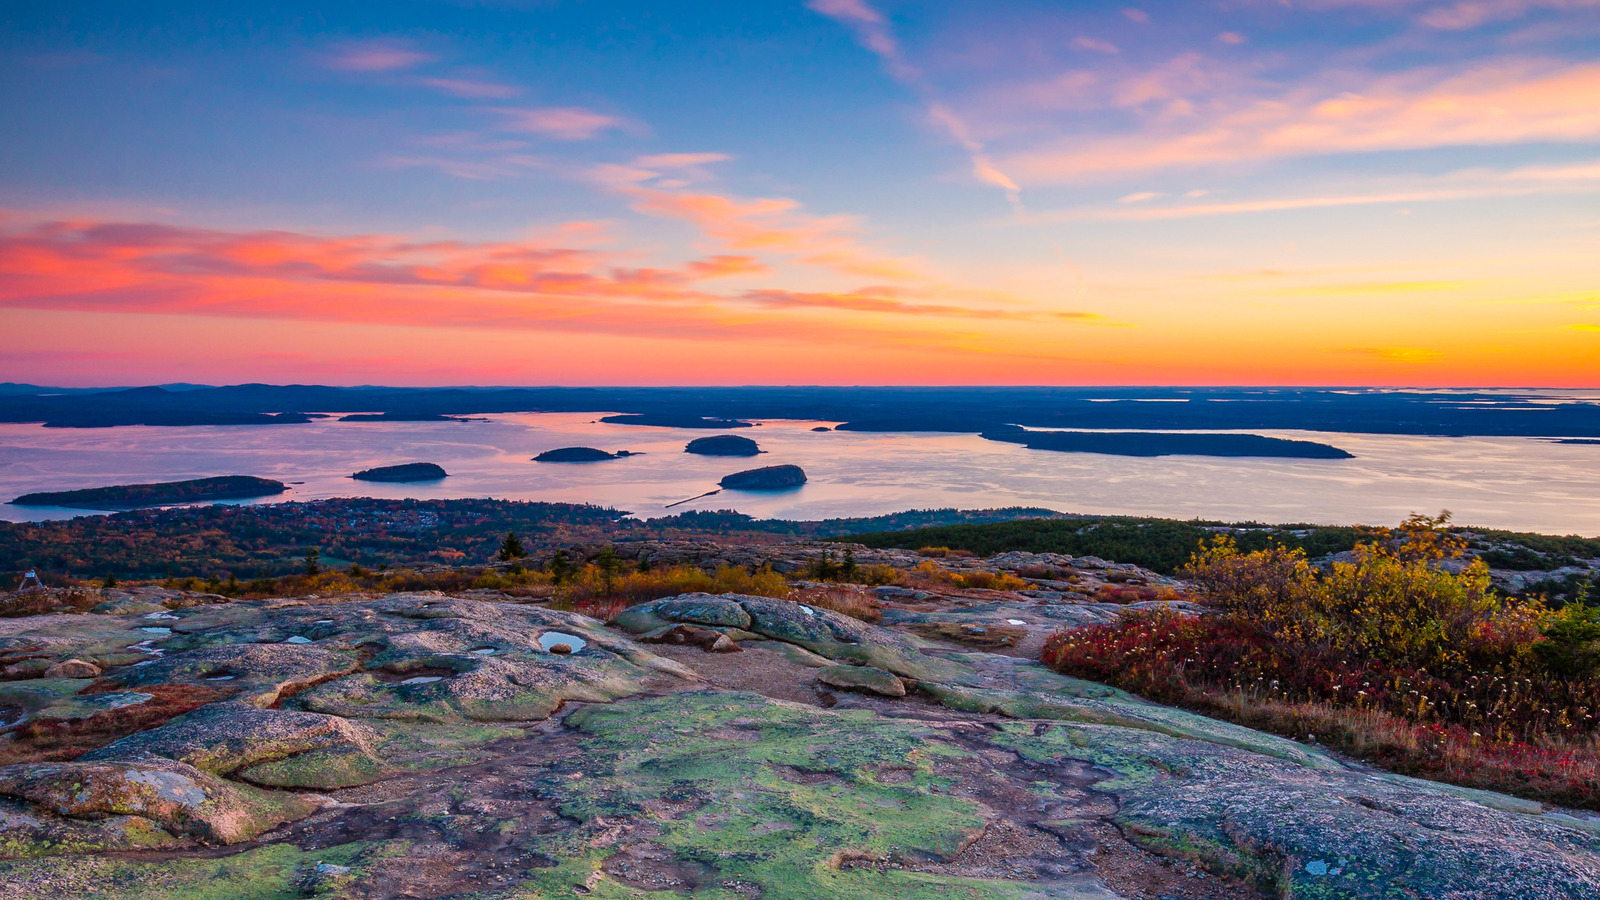 Be The First To Watch The Country's Sunrise At Acadia National Park